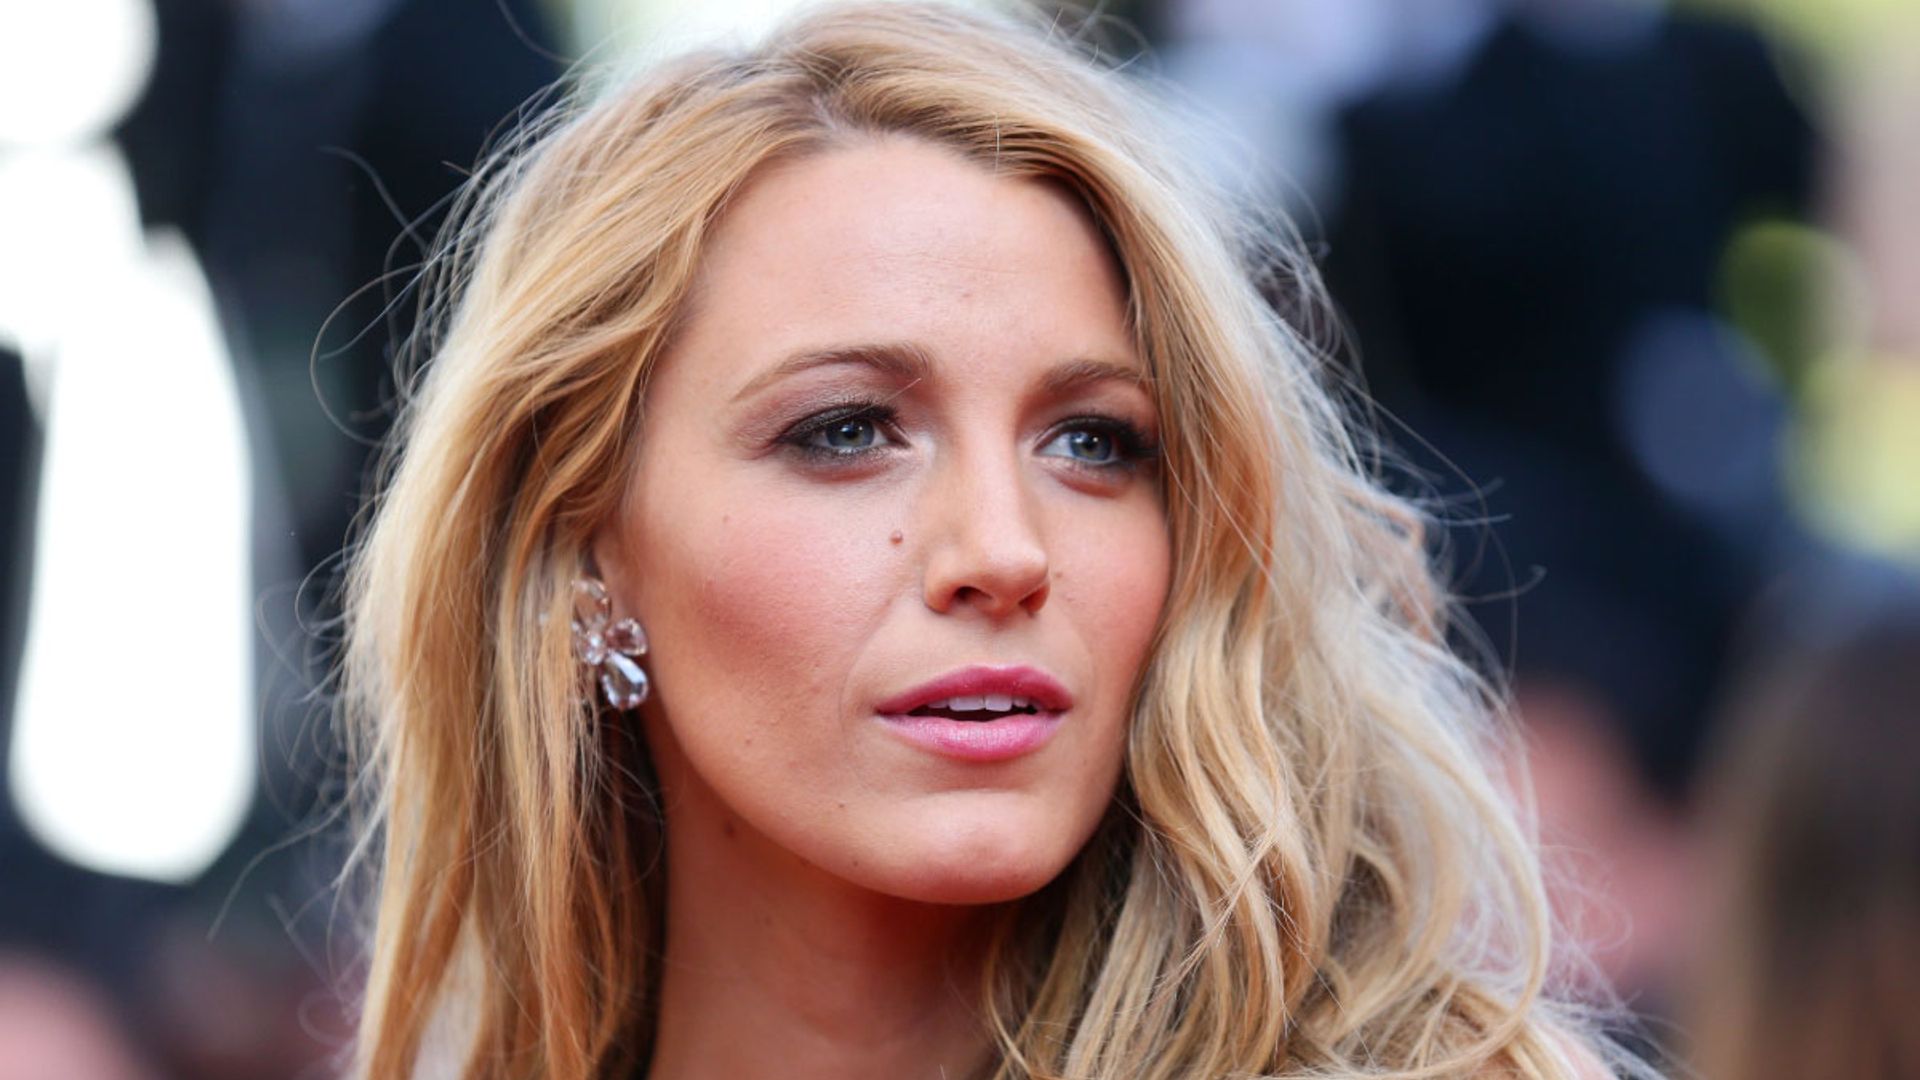 Blake Lively Launched Another Press Tour, & Celebs Have Stepped Up